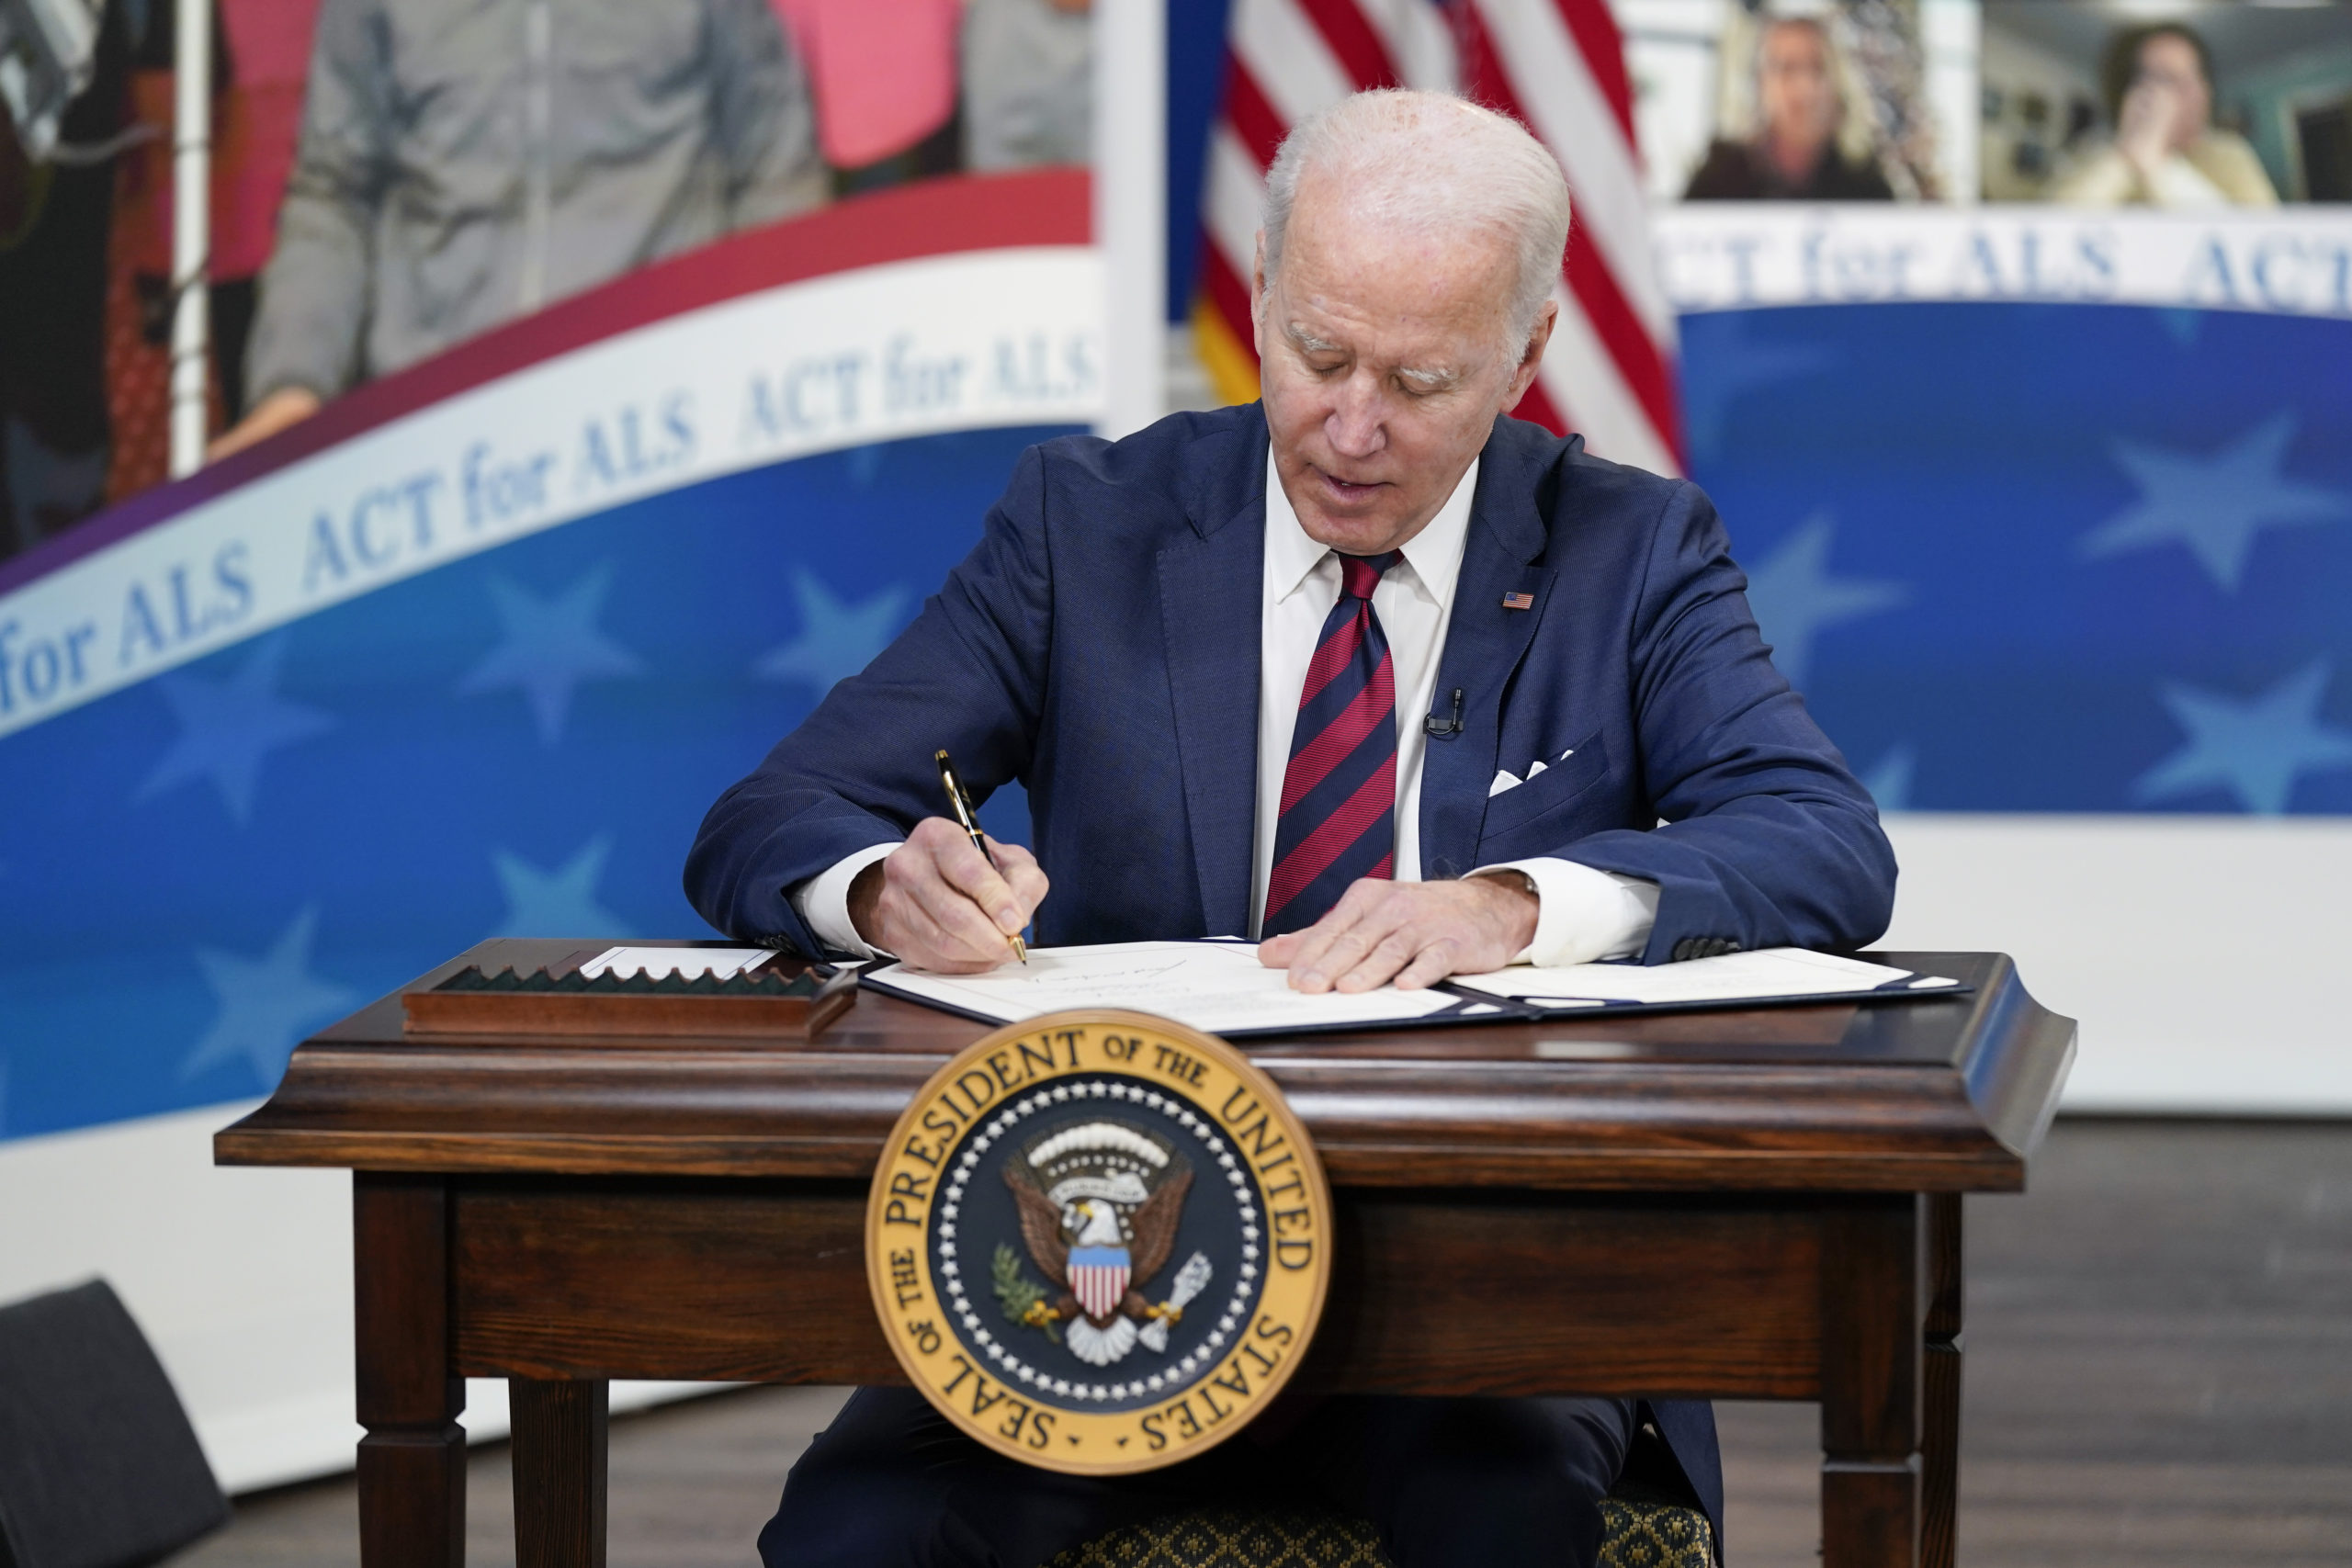 President Joe Biden signs the "Accelerating Access to Critical Therapies for ALS Act" into law duri...